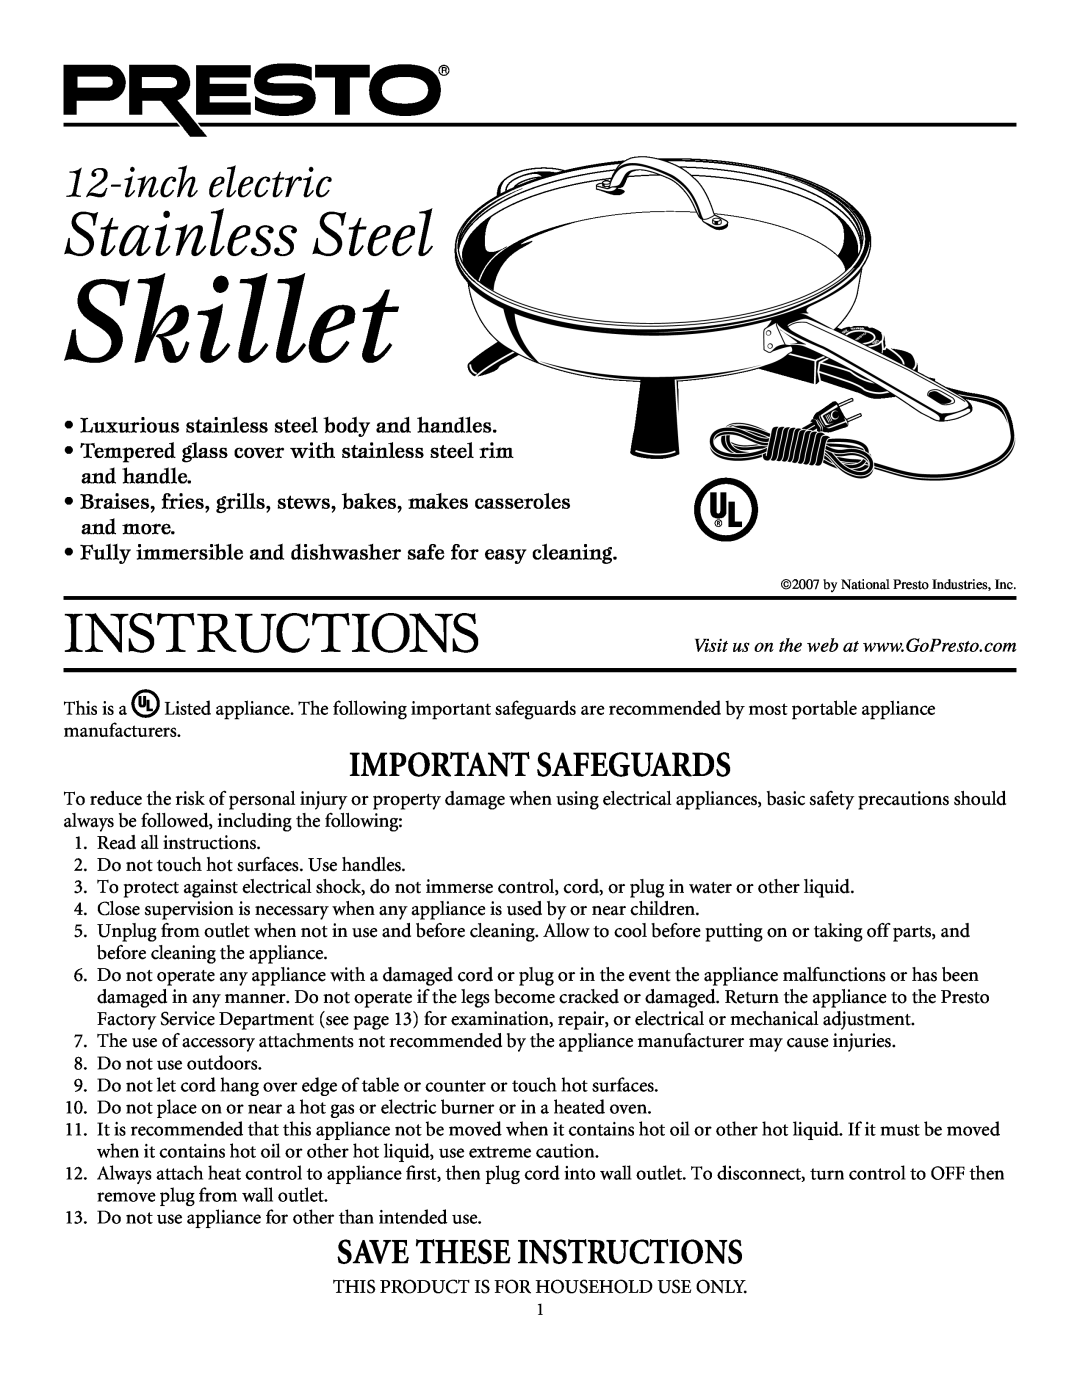 Presto electric Stainless Steel Skillet manual inchelectric, Important Safeguards, Save These Instructions 